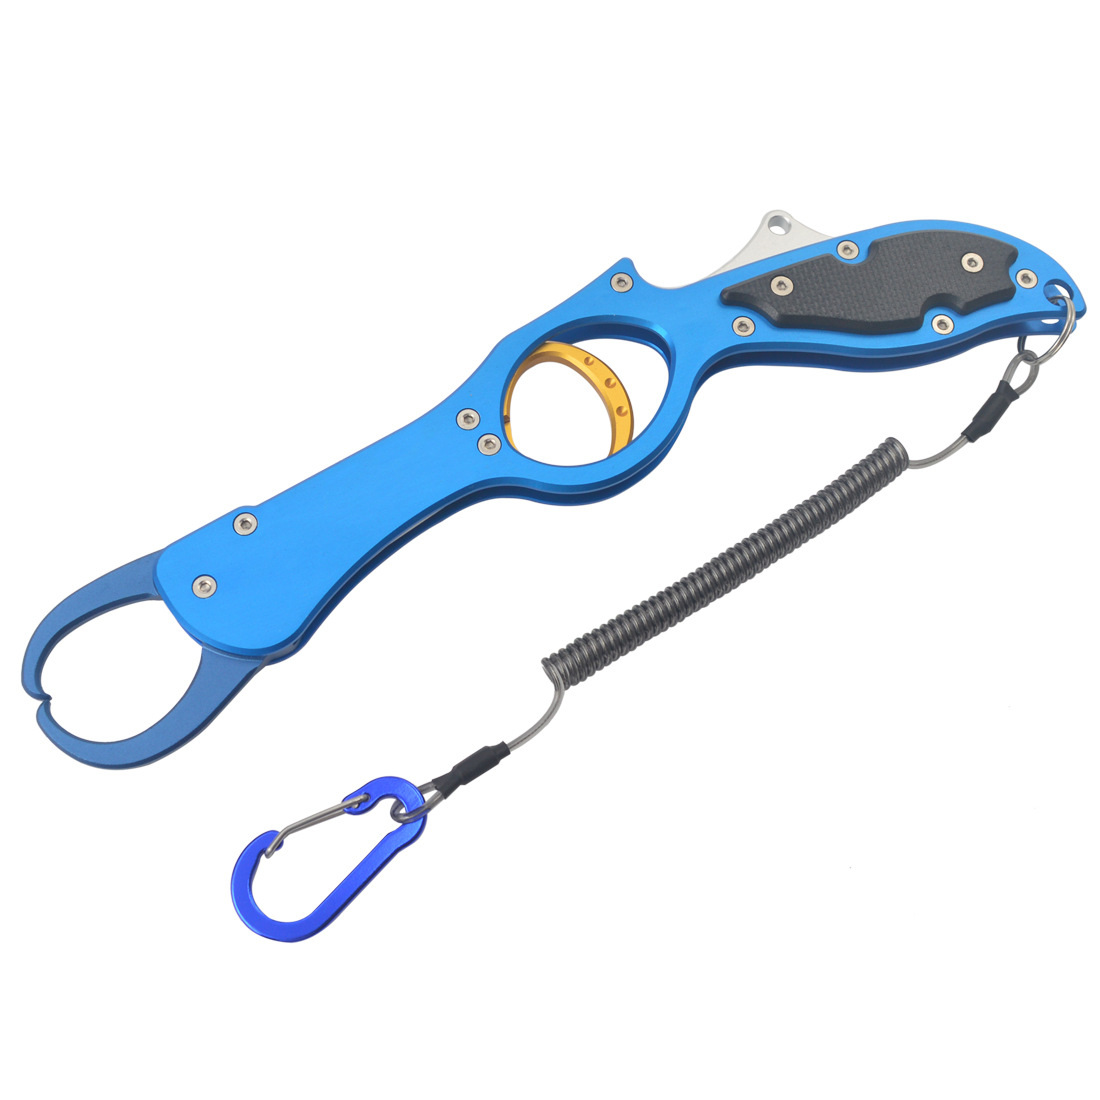 New BL-023 Aluminum Alloy Fish Control Device Fish Catcher Forceps Fish Clamp Large Clamp Outdoor Fishing Tool